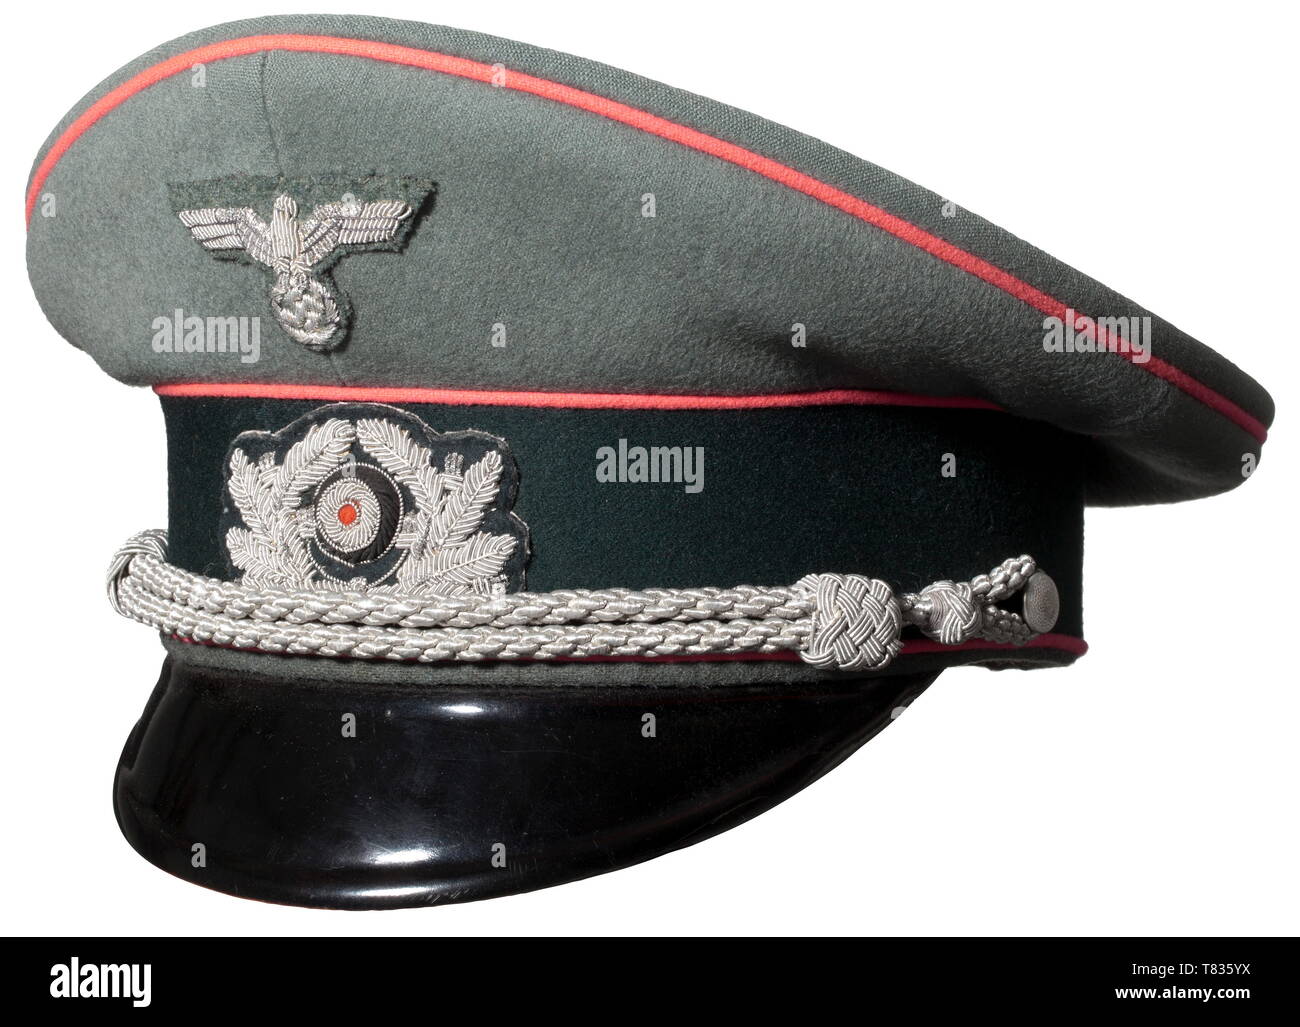 A visor cap for officers in the elegant saddle form, made of field-grey gabardine with dark green cap band, pink piping, hand-embroidered aluminium insignia (the eagle re-sewn), silver officer's cap cording. Brown leather sweat band, yellow silk lining and maker's label 'Tiller, A.G. in Wien'. historic, historical, 20th century, armoured corps, armored corps, tank force, tank forces, branch of service, branches of service, armed service, armed services, military, militaria, utensil, piece of equipment, utensils, object, objects, stills, army, Wehrmacht, NS, National Sociali, Editorial-Use-Only Stock Photo